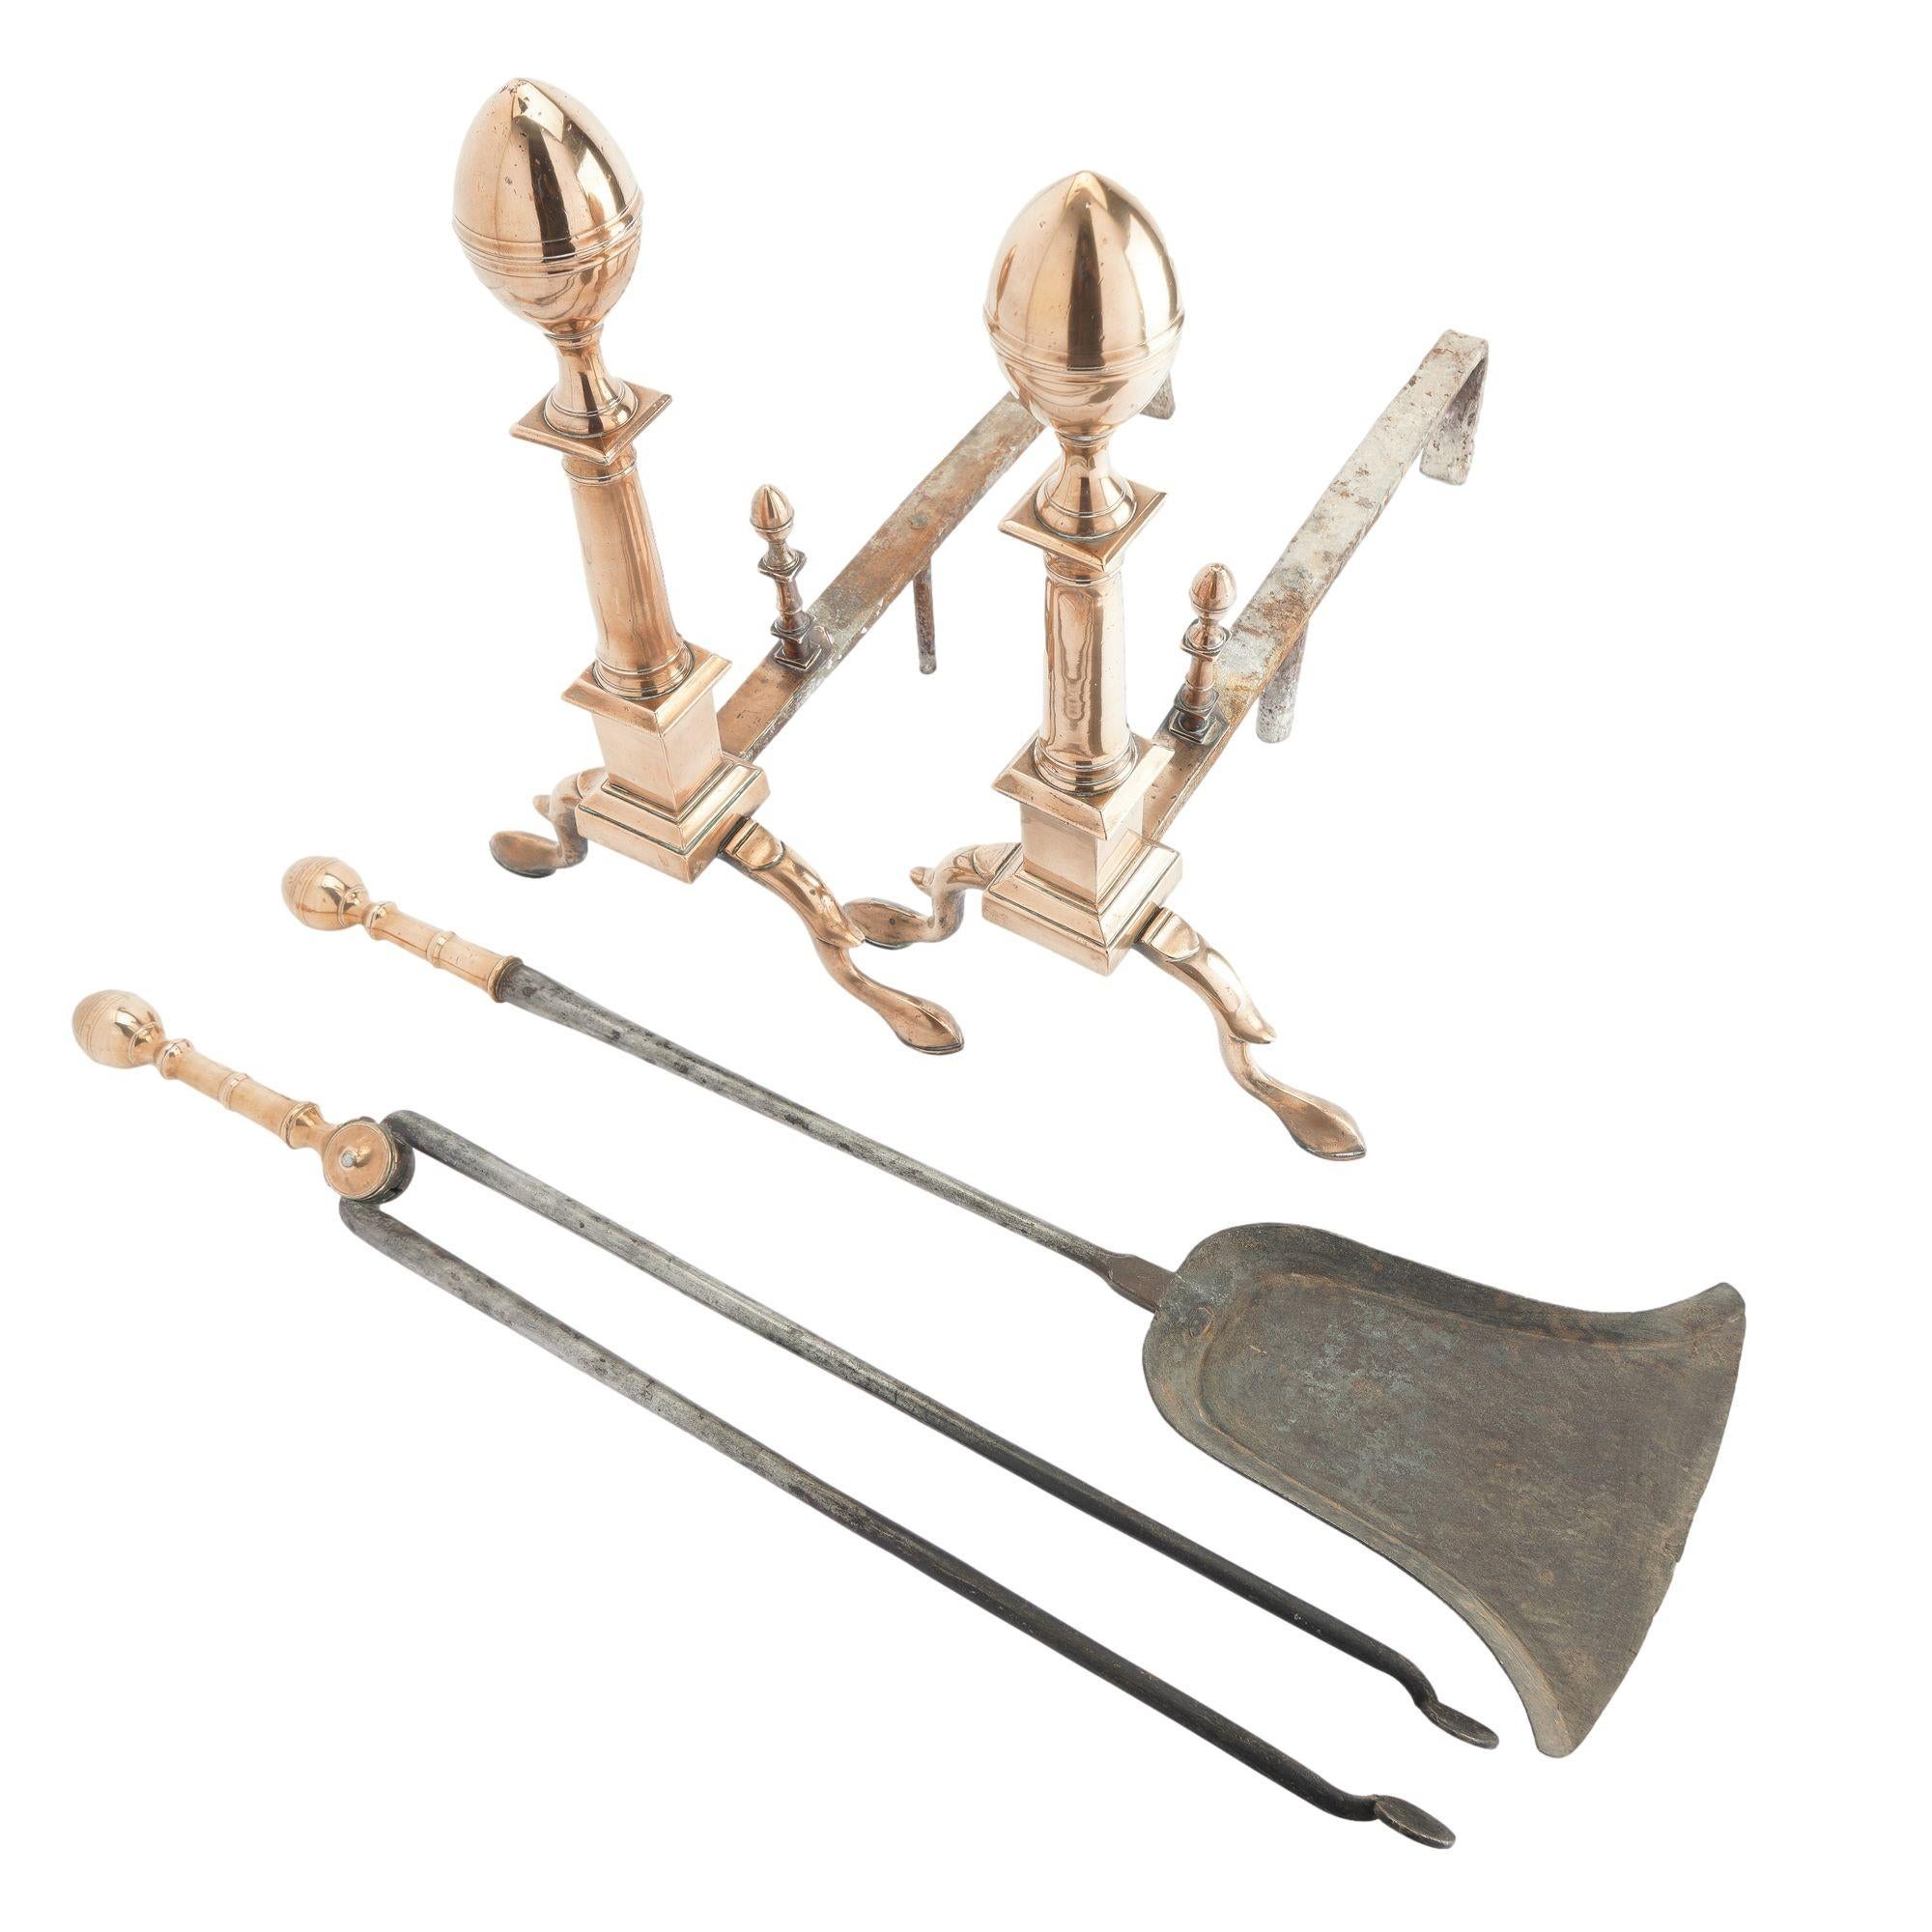 Pair of cast bell metal brass lemon top andirons with matching fire tools.

The andirons feature oval lemon finials which sit on a Doric column with plinth, and the cast arched legs with spurs rest on finely formed slipper pad feet. The crossing